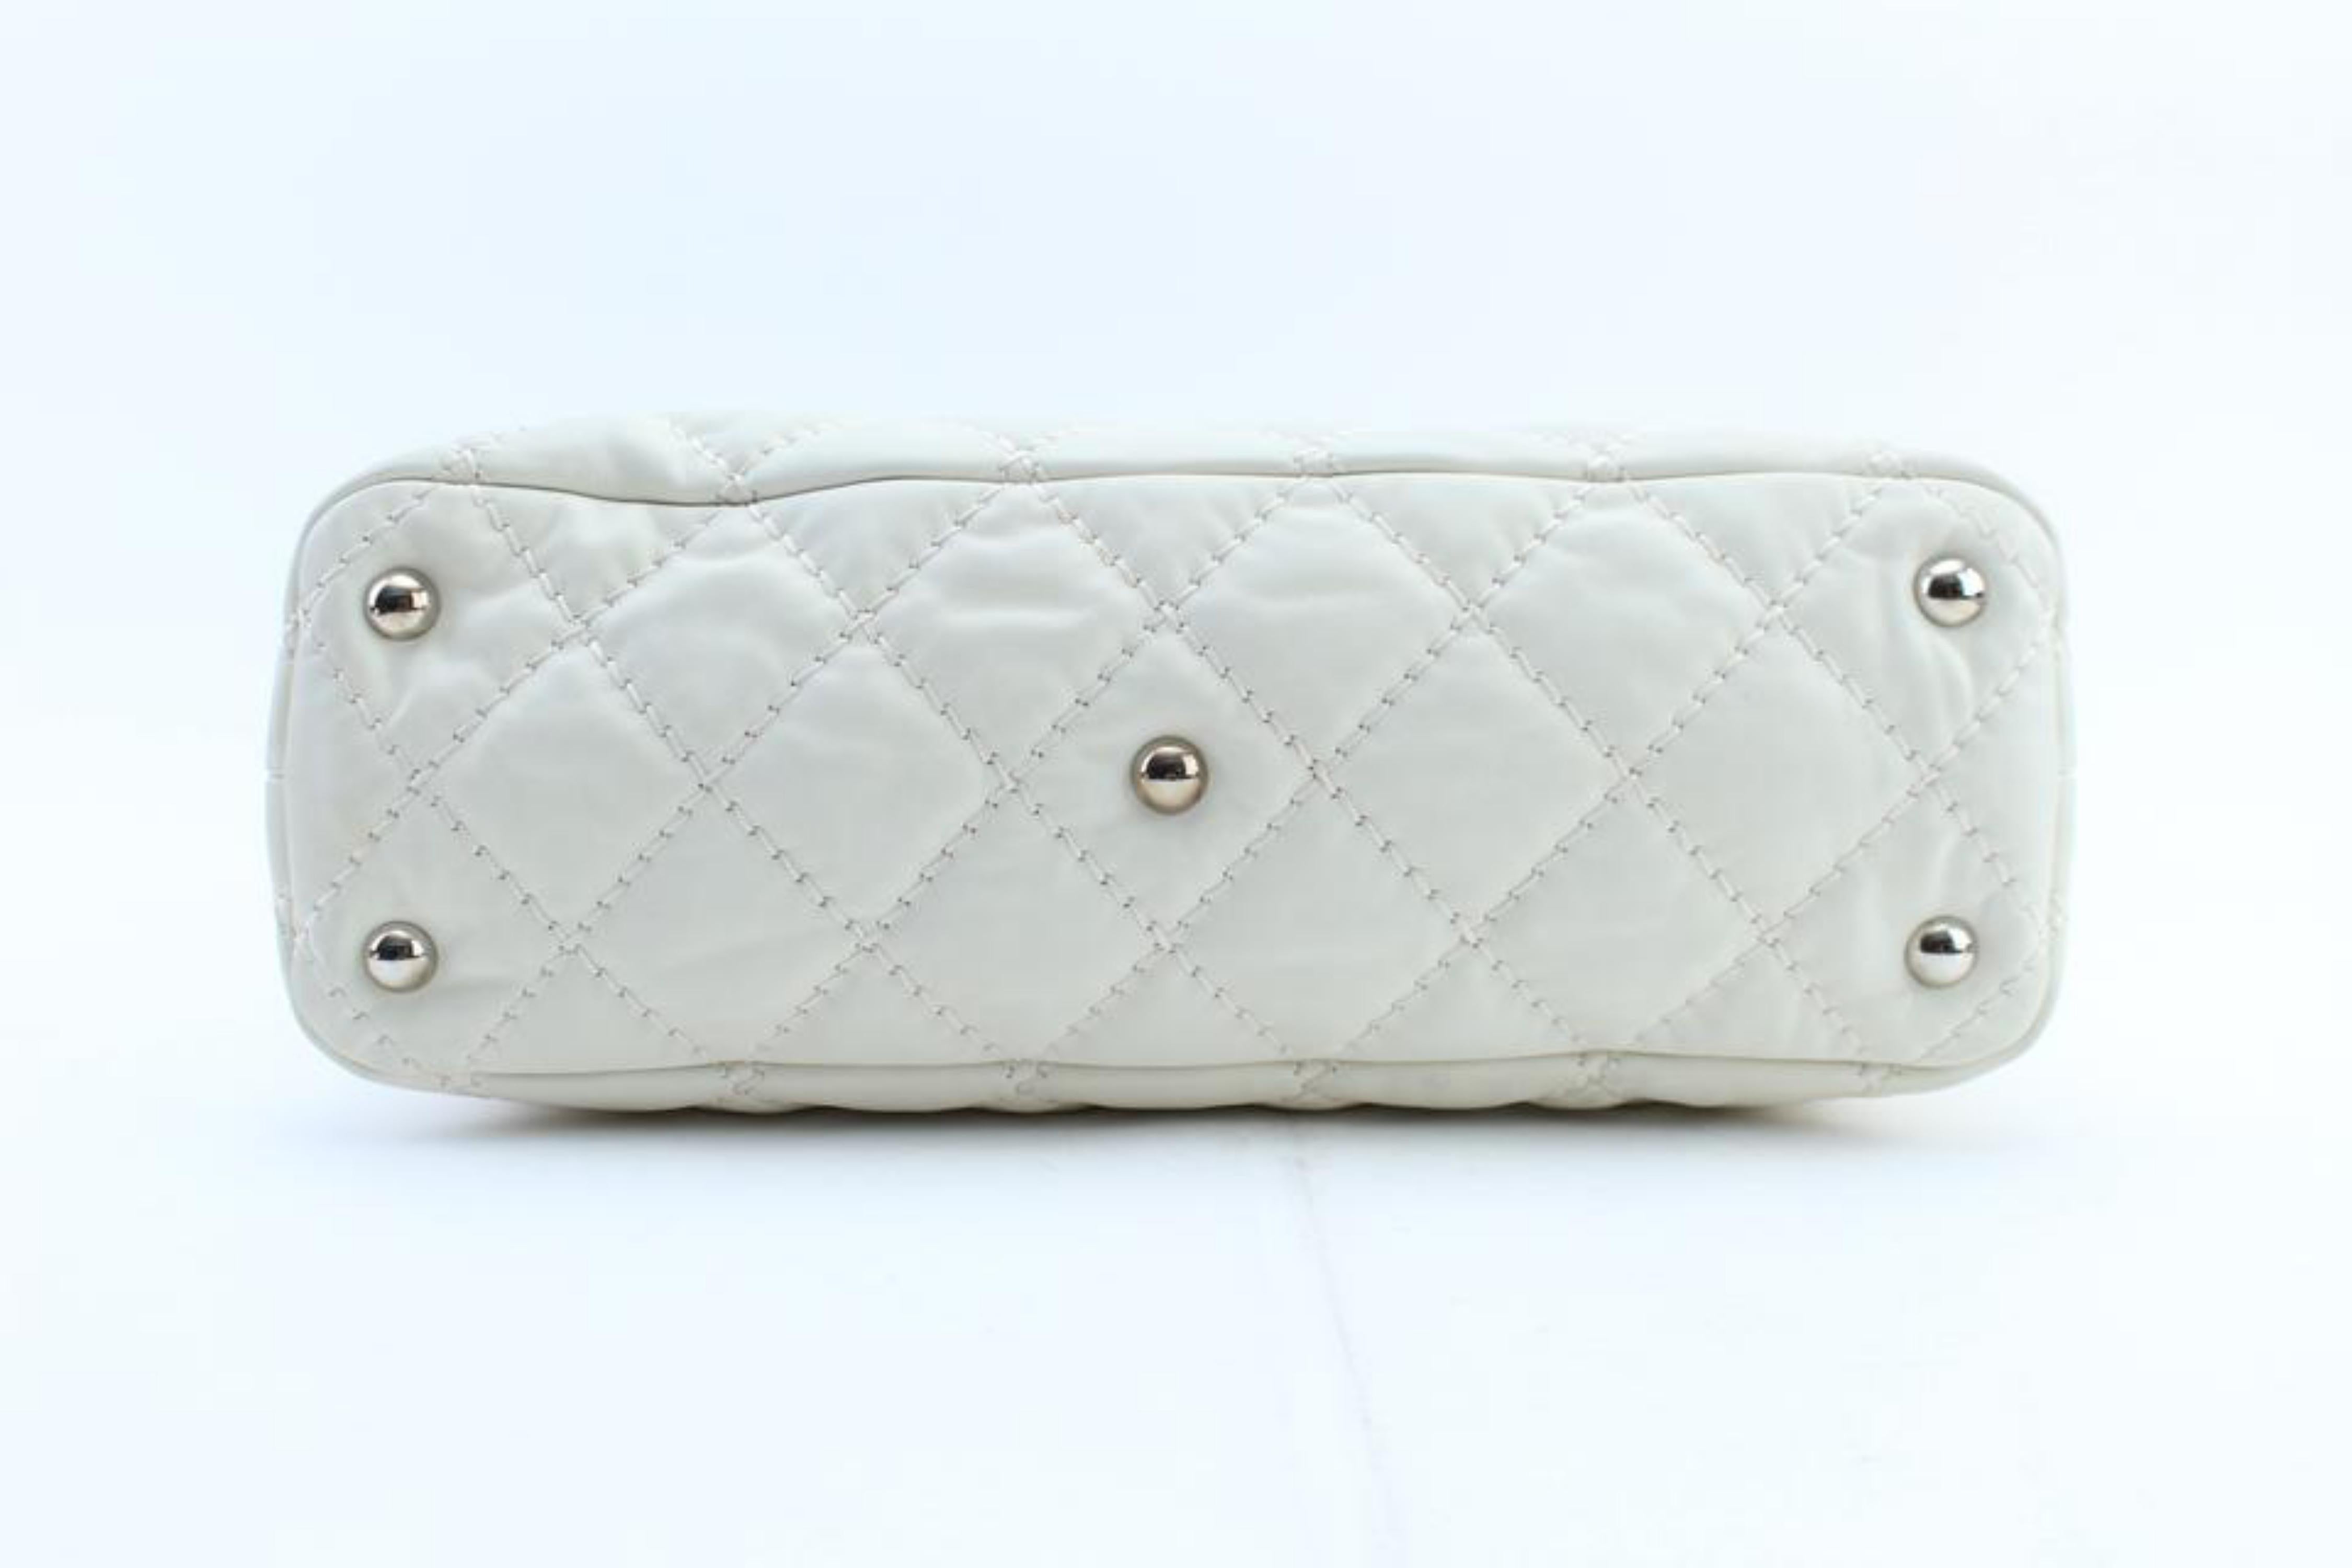 Chanel Hobo French Riviera 13cr0228 Ivory Quilted Leather Shoulder Bag For Sale 7